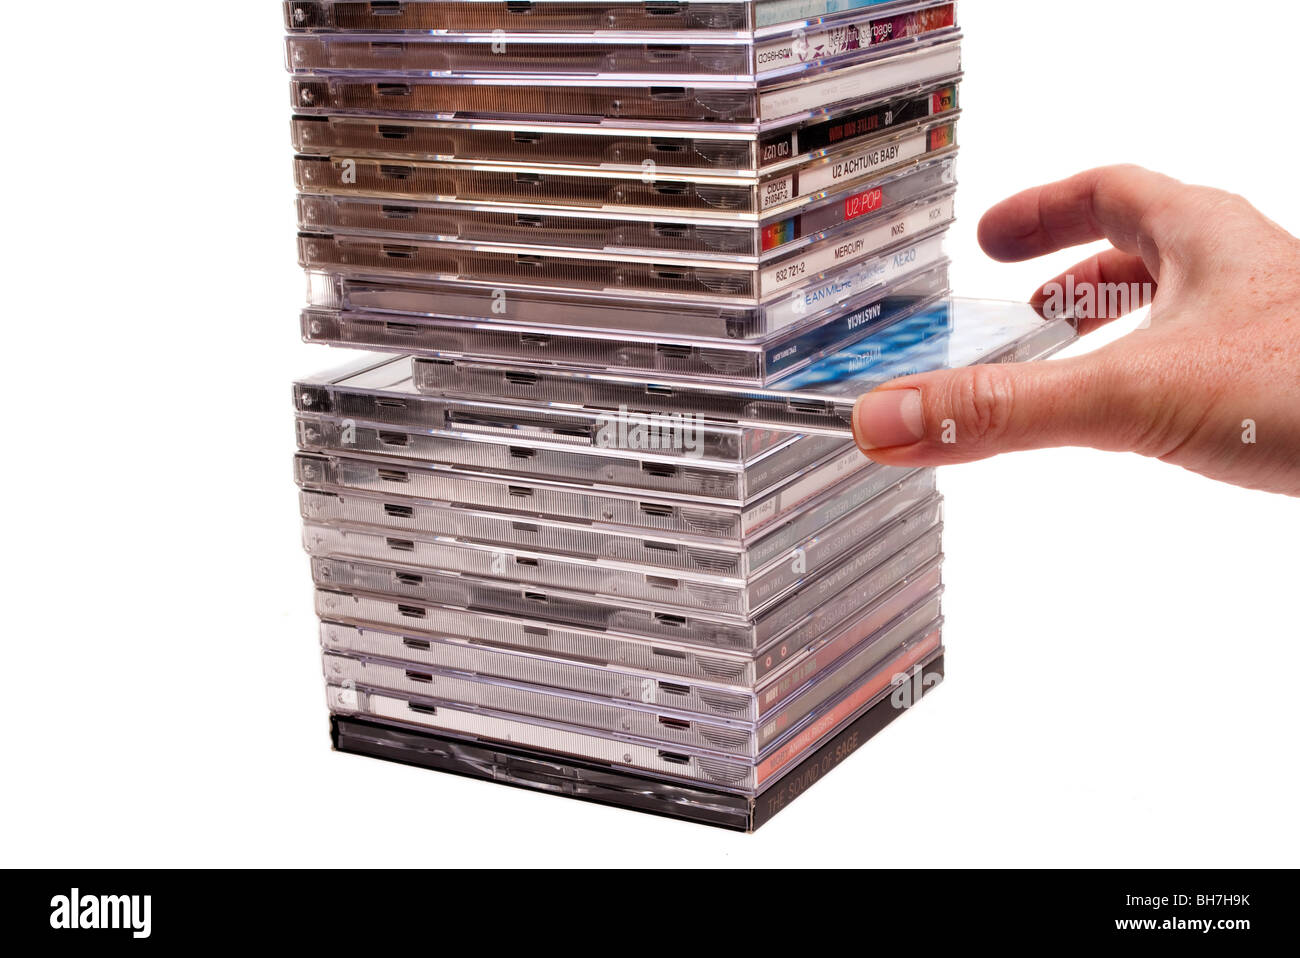 taking cd from stack of cds Stock Photo